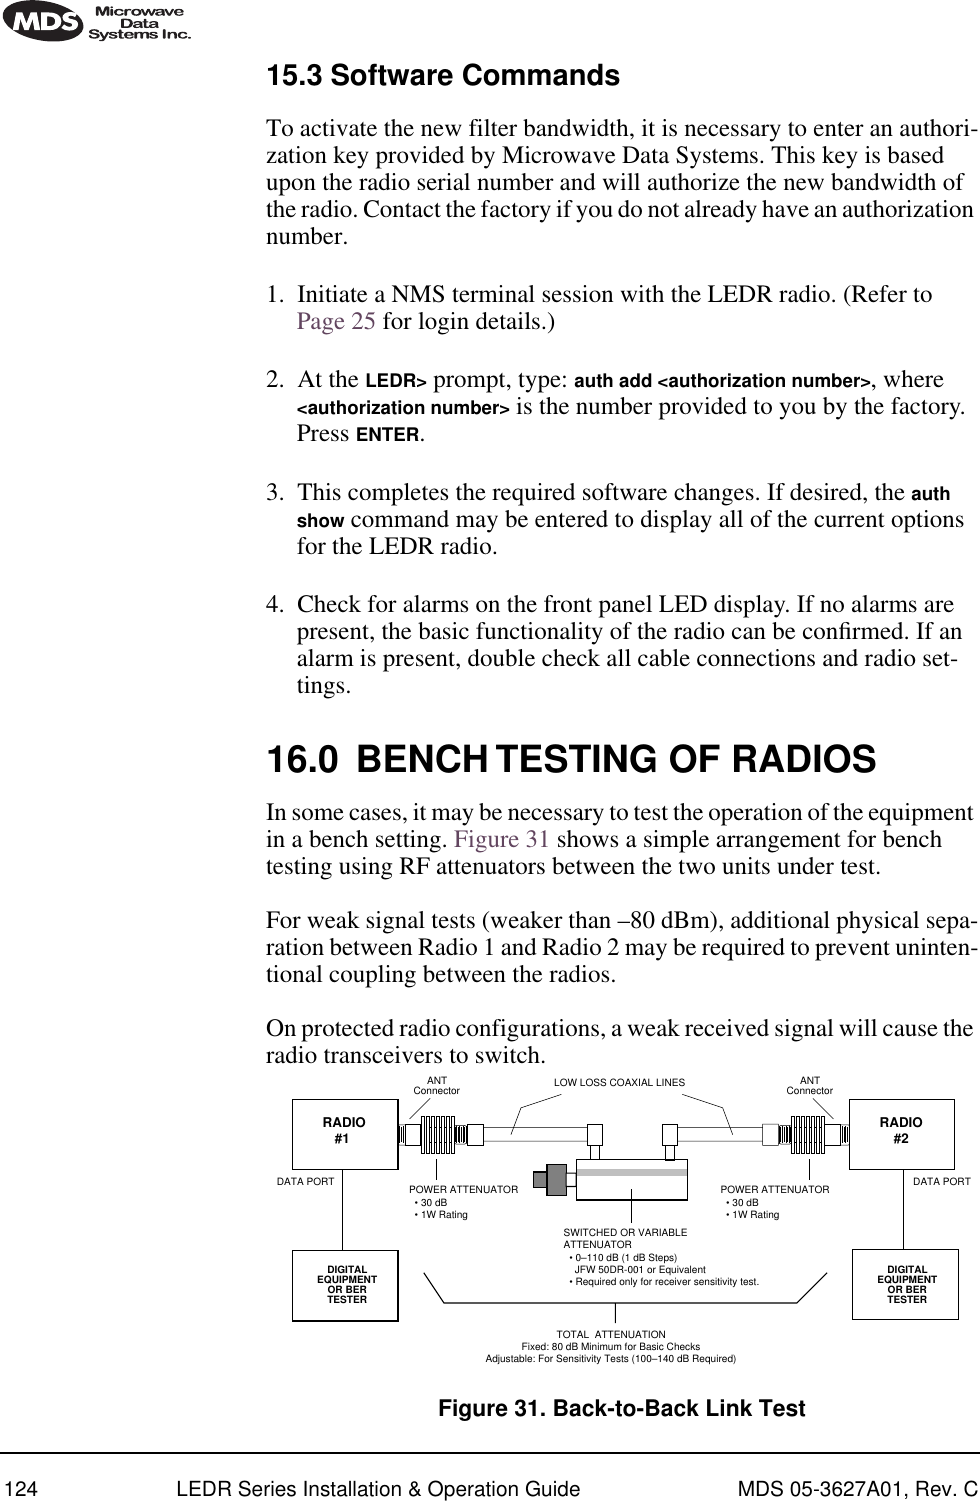 124 LEDR Series Installation &amp; Operation Guide MDS 05-3627A01, Rev. C15.3 Software CommandsTo activate the new filter bandwidth, it is necessary to enter an authori-zation key provided by Microwave Data Systems. This key is based upon the radio serial number and will authorize the new bandwidth of the radio. Contact the factory if you do not already have an authorization number.1. Initiate a NMS terminal session with the LEDR radio. (Refer to Page 25 for login details.)2. At the LEDR&gt; prompt, type: auth add &lt;authorization number&gt;, where &lt;authorization number&gt; is the number provided to you by the factory. Press ENTER.3. This completes the required software changes. If desired, the auth show command may be entered to display all of the current options for the LEDR radio.4. Check for alarms on the front panel LED display. If no alarms are present, the basic functionality of the radio can be conﬁrmed. If an alarm is present, double check all cable connections and radio set-tings.16.0 BENCH TESTING OF RADIOSIn some cases, it may be necessary to test the operation of the equipment in a bench setting. Figure 31 shows a simple arrangement for bench testing using RF attenuators between the two units under test. For weak signal tests (weaker than –80 dBm), additional physical sepa-ration between Radio 1 and Radio 2 may be required to prevent uninten-tional coupling between the radios. On protected radio configurations, a weak received signal will cause the radio transceivers to switch. Figure 31. Back-to-Back Link TestANTConnector ANTConnectorPOWER ATTENUATOR  • 30 dB  • 1W RatingPOWER ATTENUATOR  • 30 dB  • 1W RatingSWITCHED OR VARIABLEATTENUATOR  • 0–110 dB (1 dB Steps)    JFW 50DR-001 or Equivalent  • Required only for receiver sensitivity test.LOW LOSS COAXIAL LINESDIGITALEQUIPMENTOR BERTESTER RADIO#1DATA PORTTOTAL  ATTENUATIONFixed: 80 dB Minimum for Basic ChecksAdjustable: For Sensitivity Tests (100–140 dB Required)DIGITALEQUIPMENTOR BERTESTERDATA PORTRADIO#2